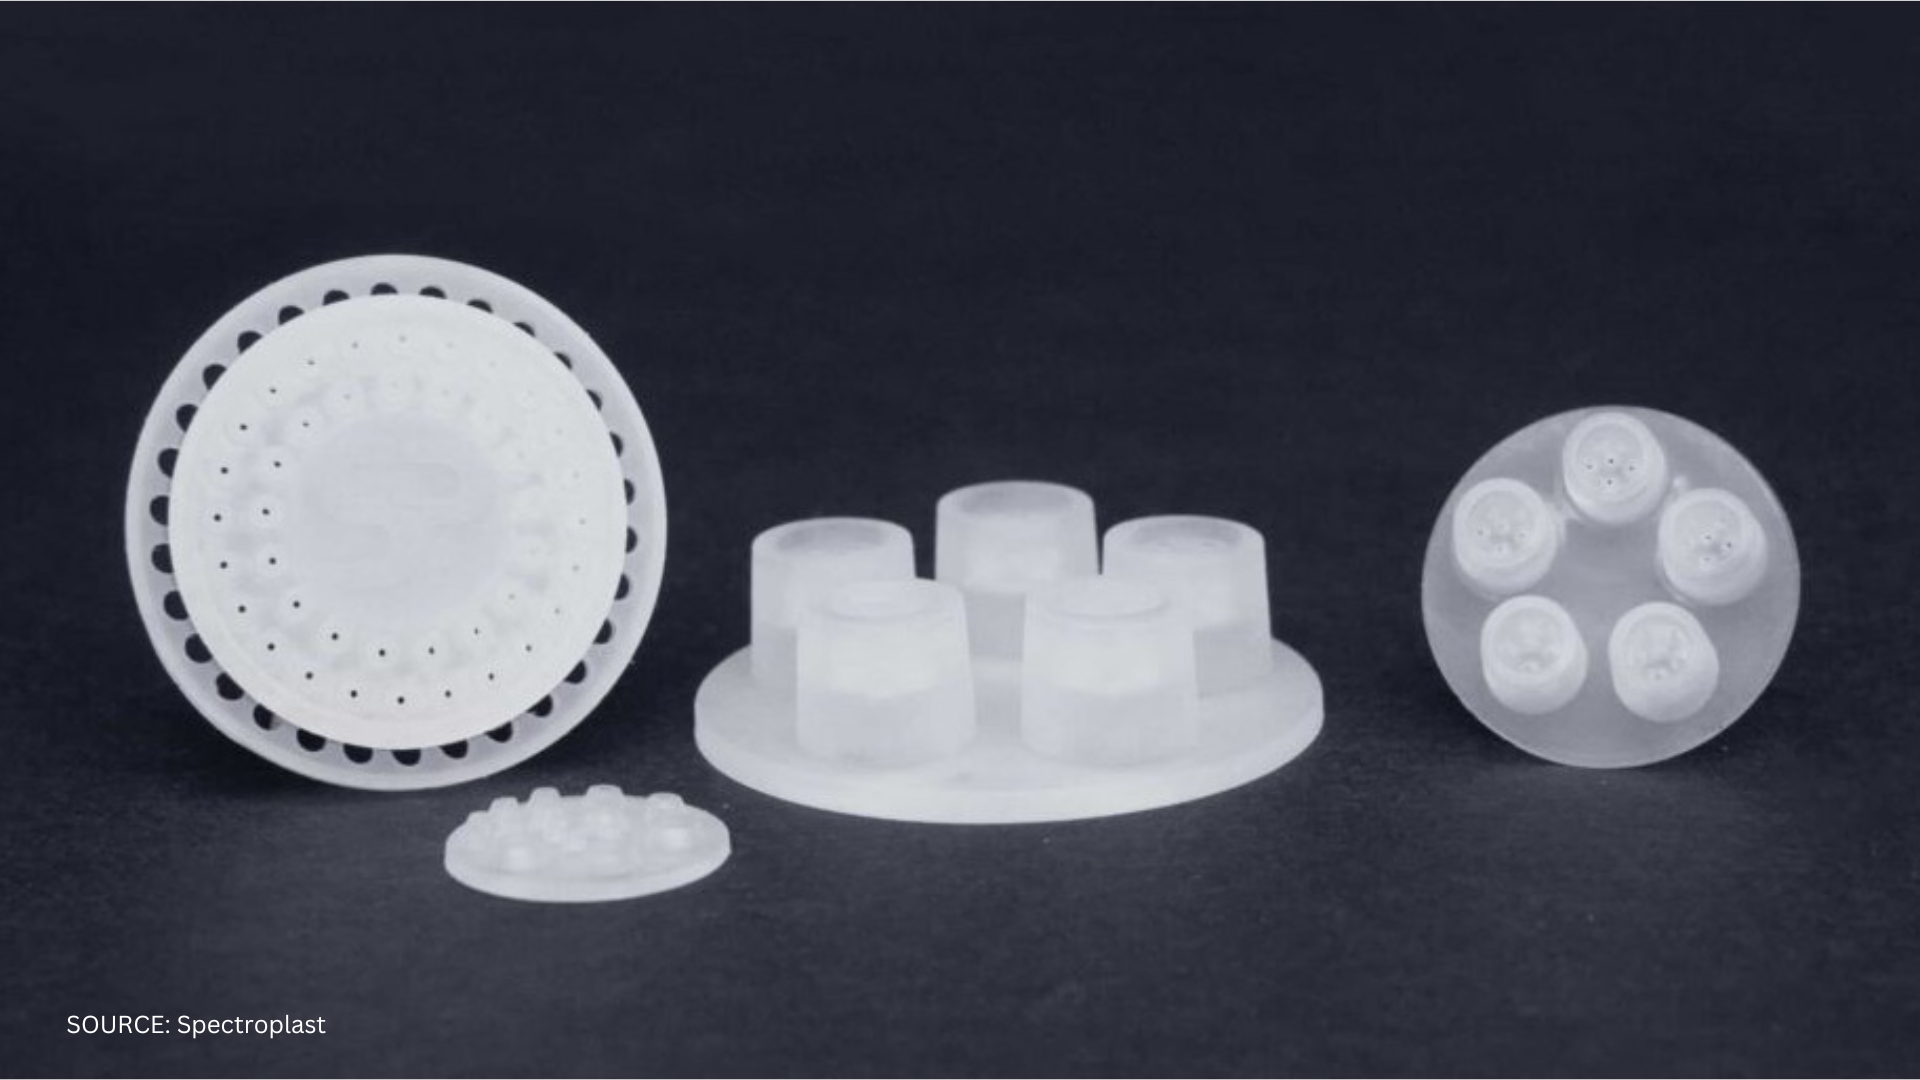 Silicone 3D printing has seen visible advances in the last few years. Indirect production of silicone parts has been viable for a much longer time